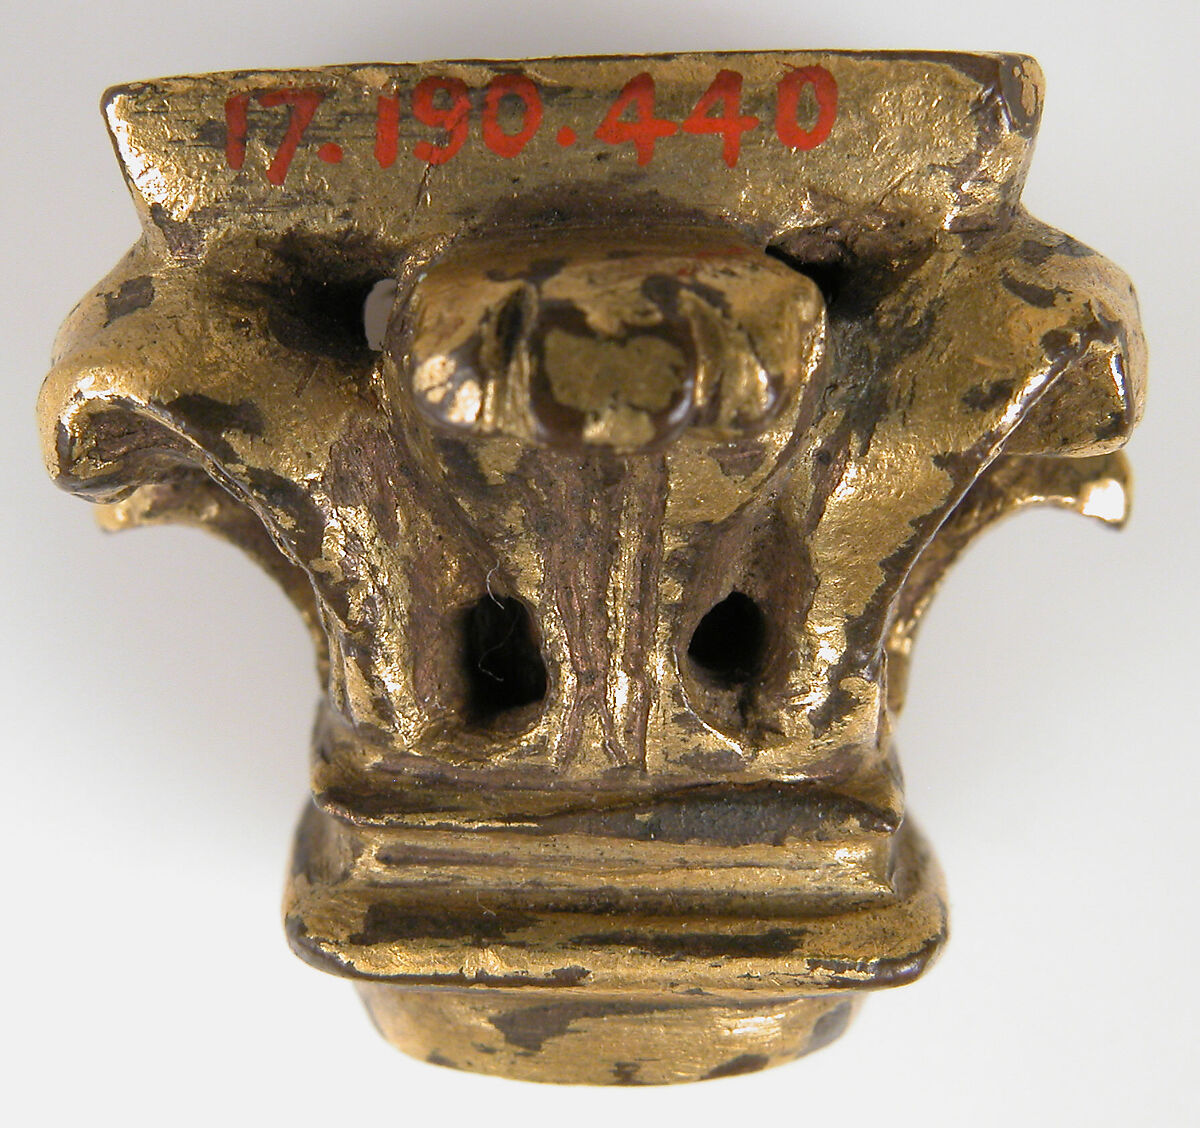 Capital from a Reliquary Shrine, copper alloy, gilt, German 